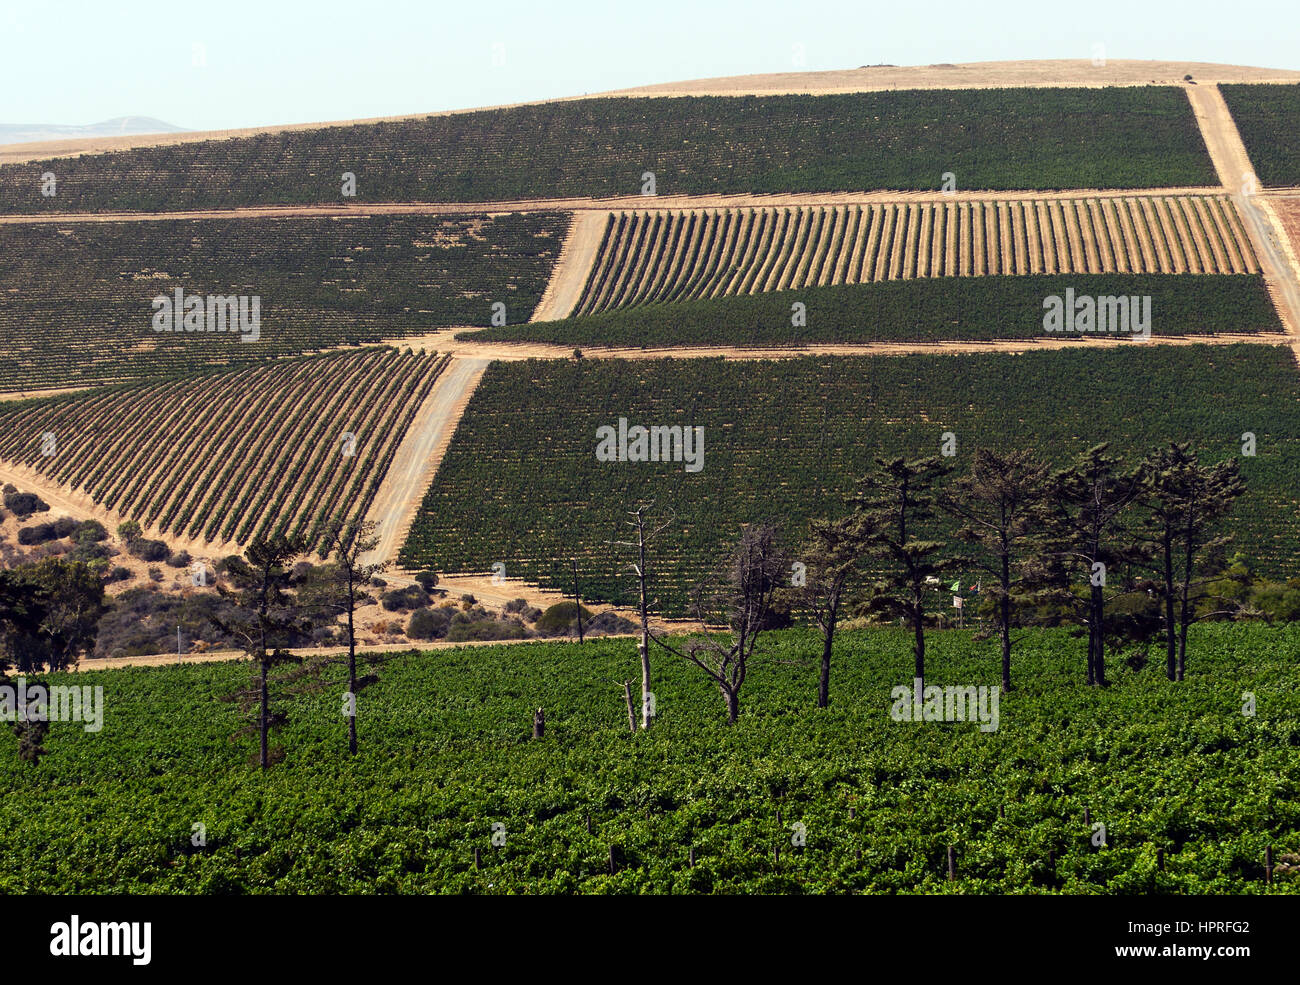 The vinyards at Durbanville hills winery estate near Cape Town, South Africa. Stock Photo